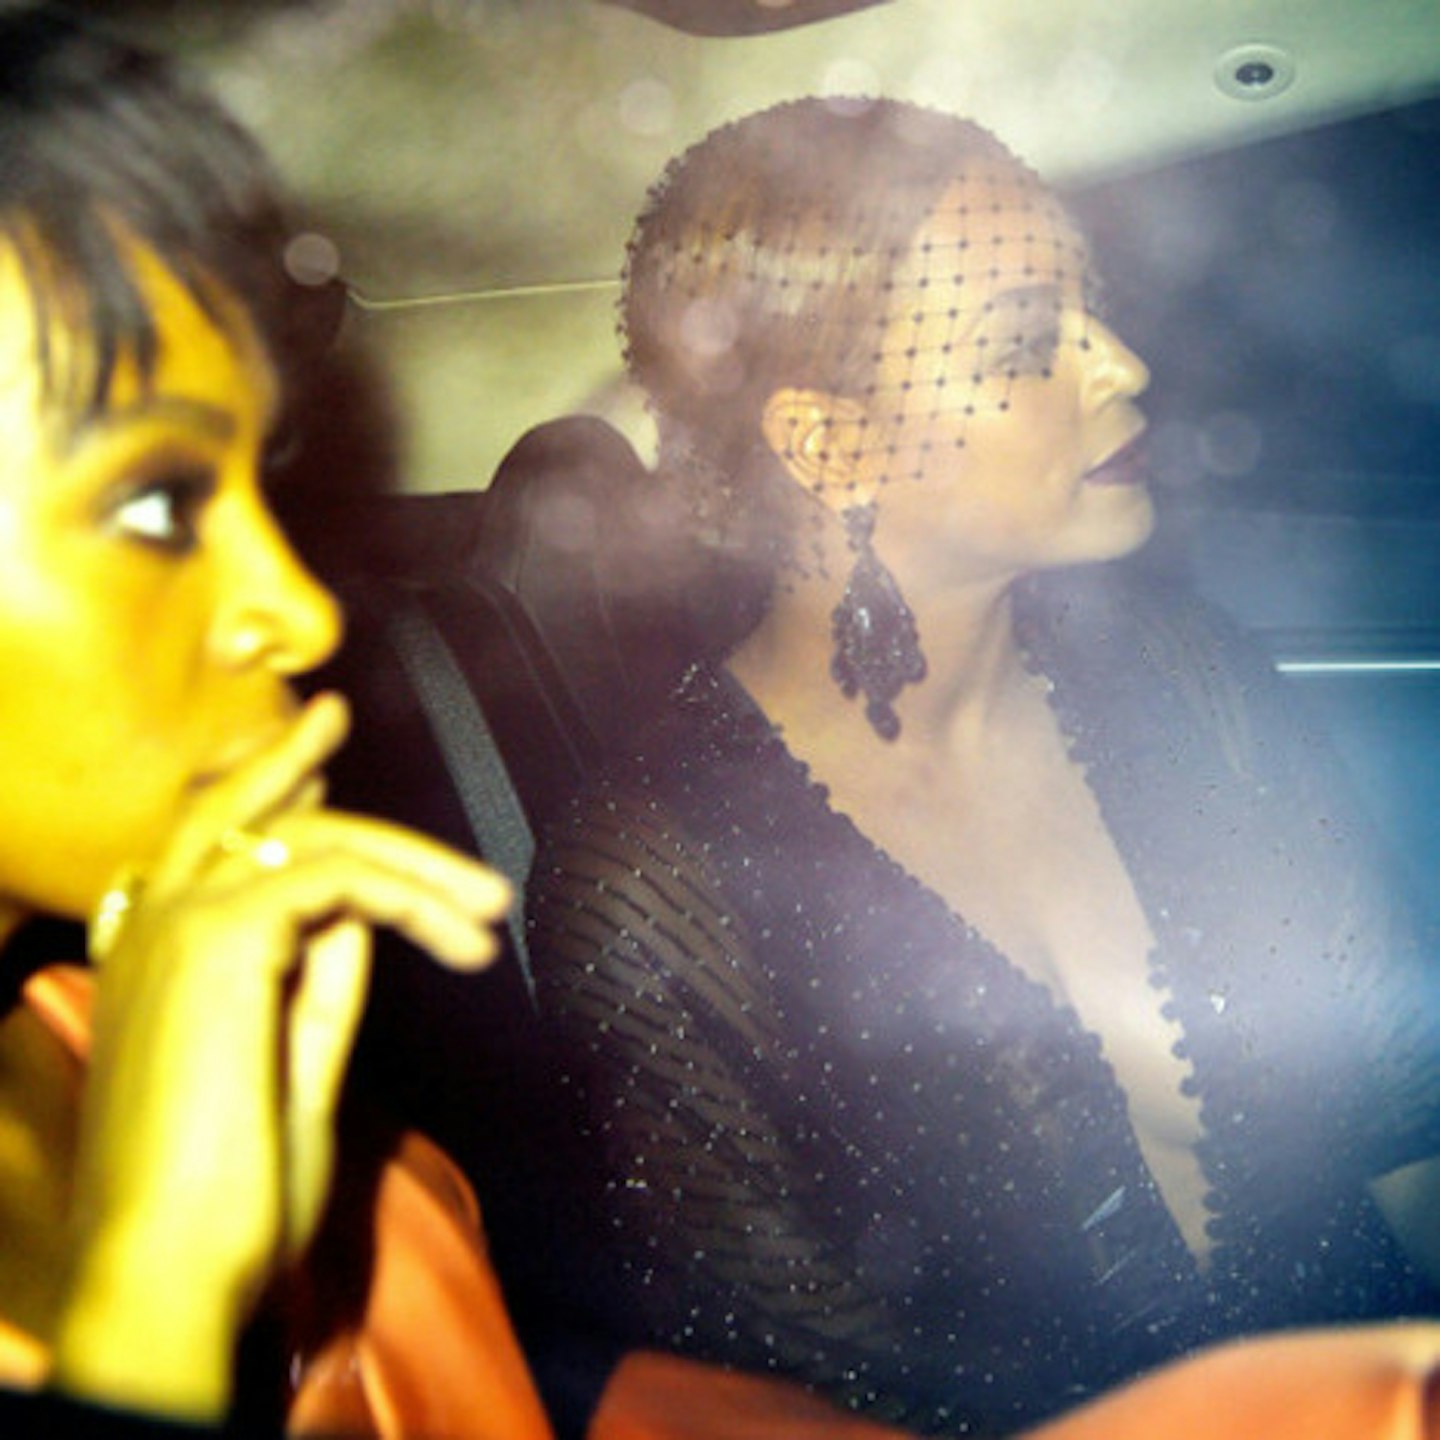 Solange and Beyonce leaving the Met Gala, minus Jay Z